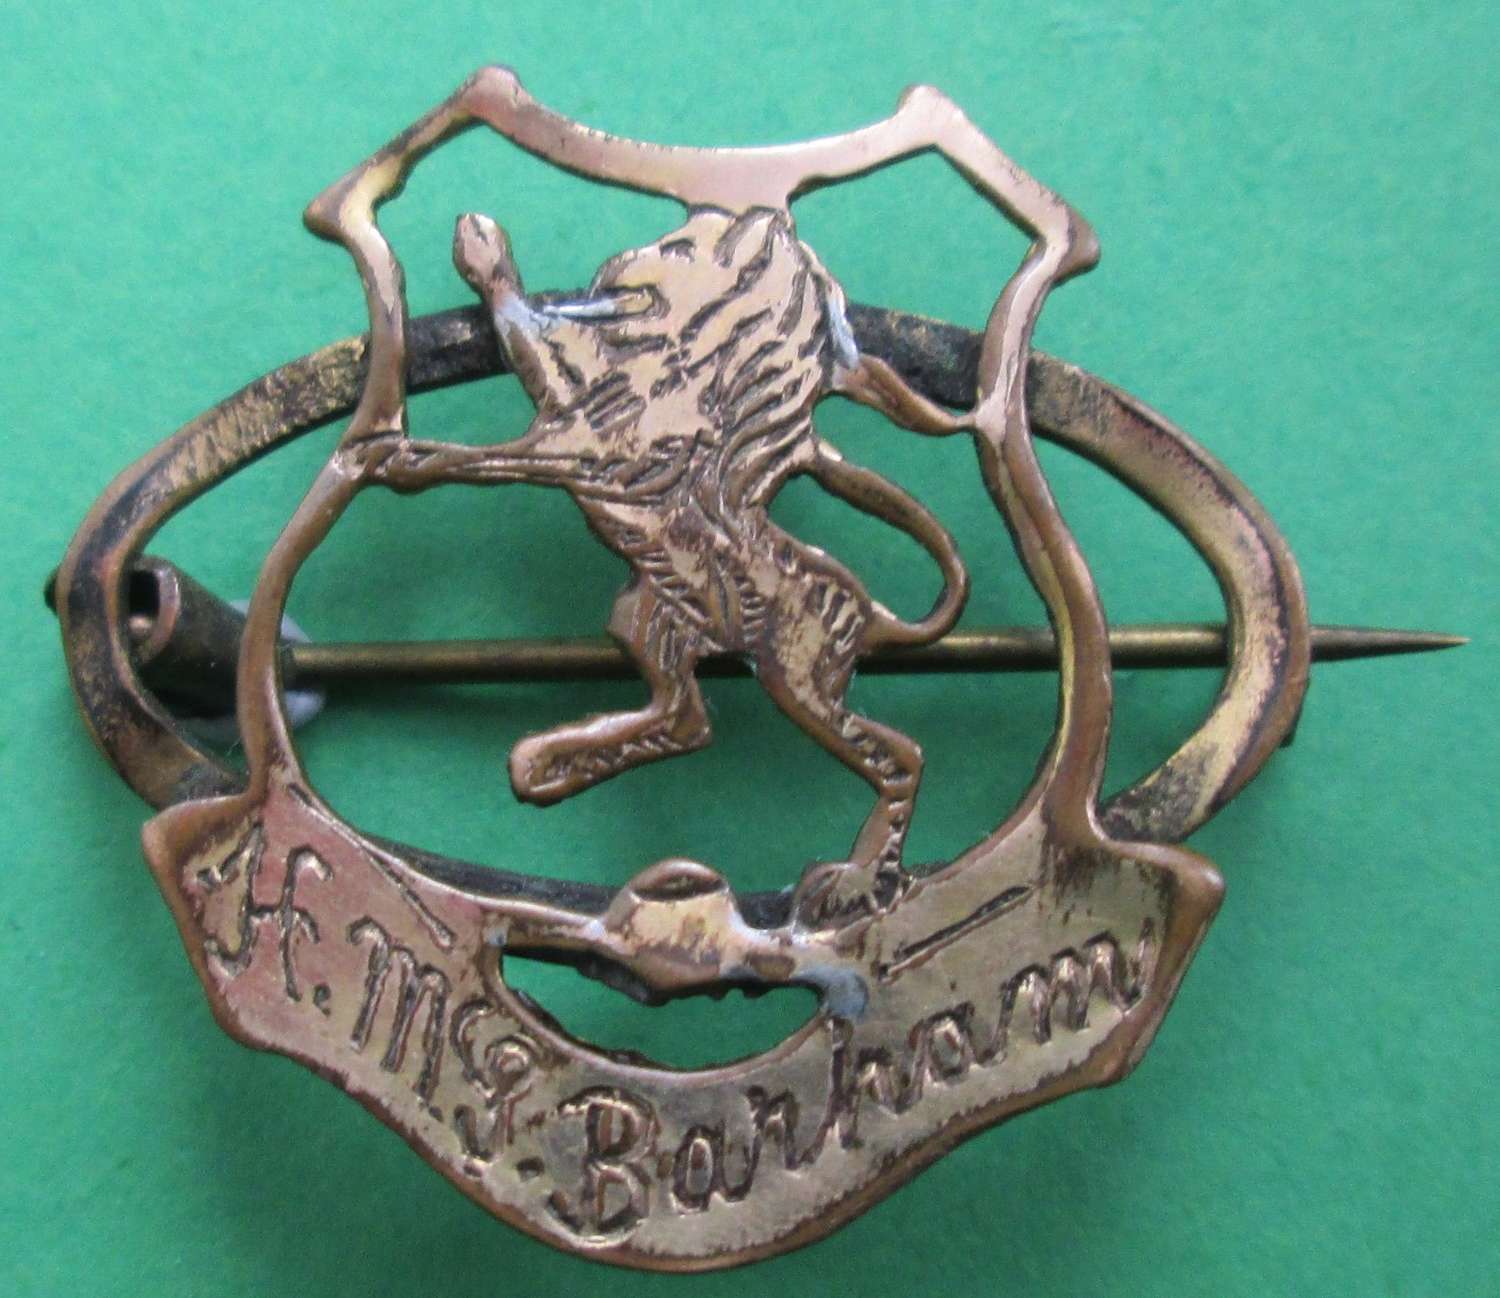 HMS DURHAM GOLD FRONTED SWEETHEART BROOCH